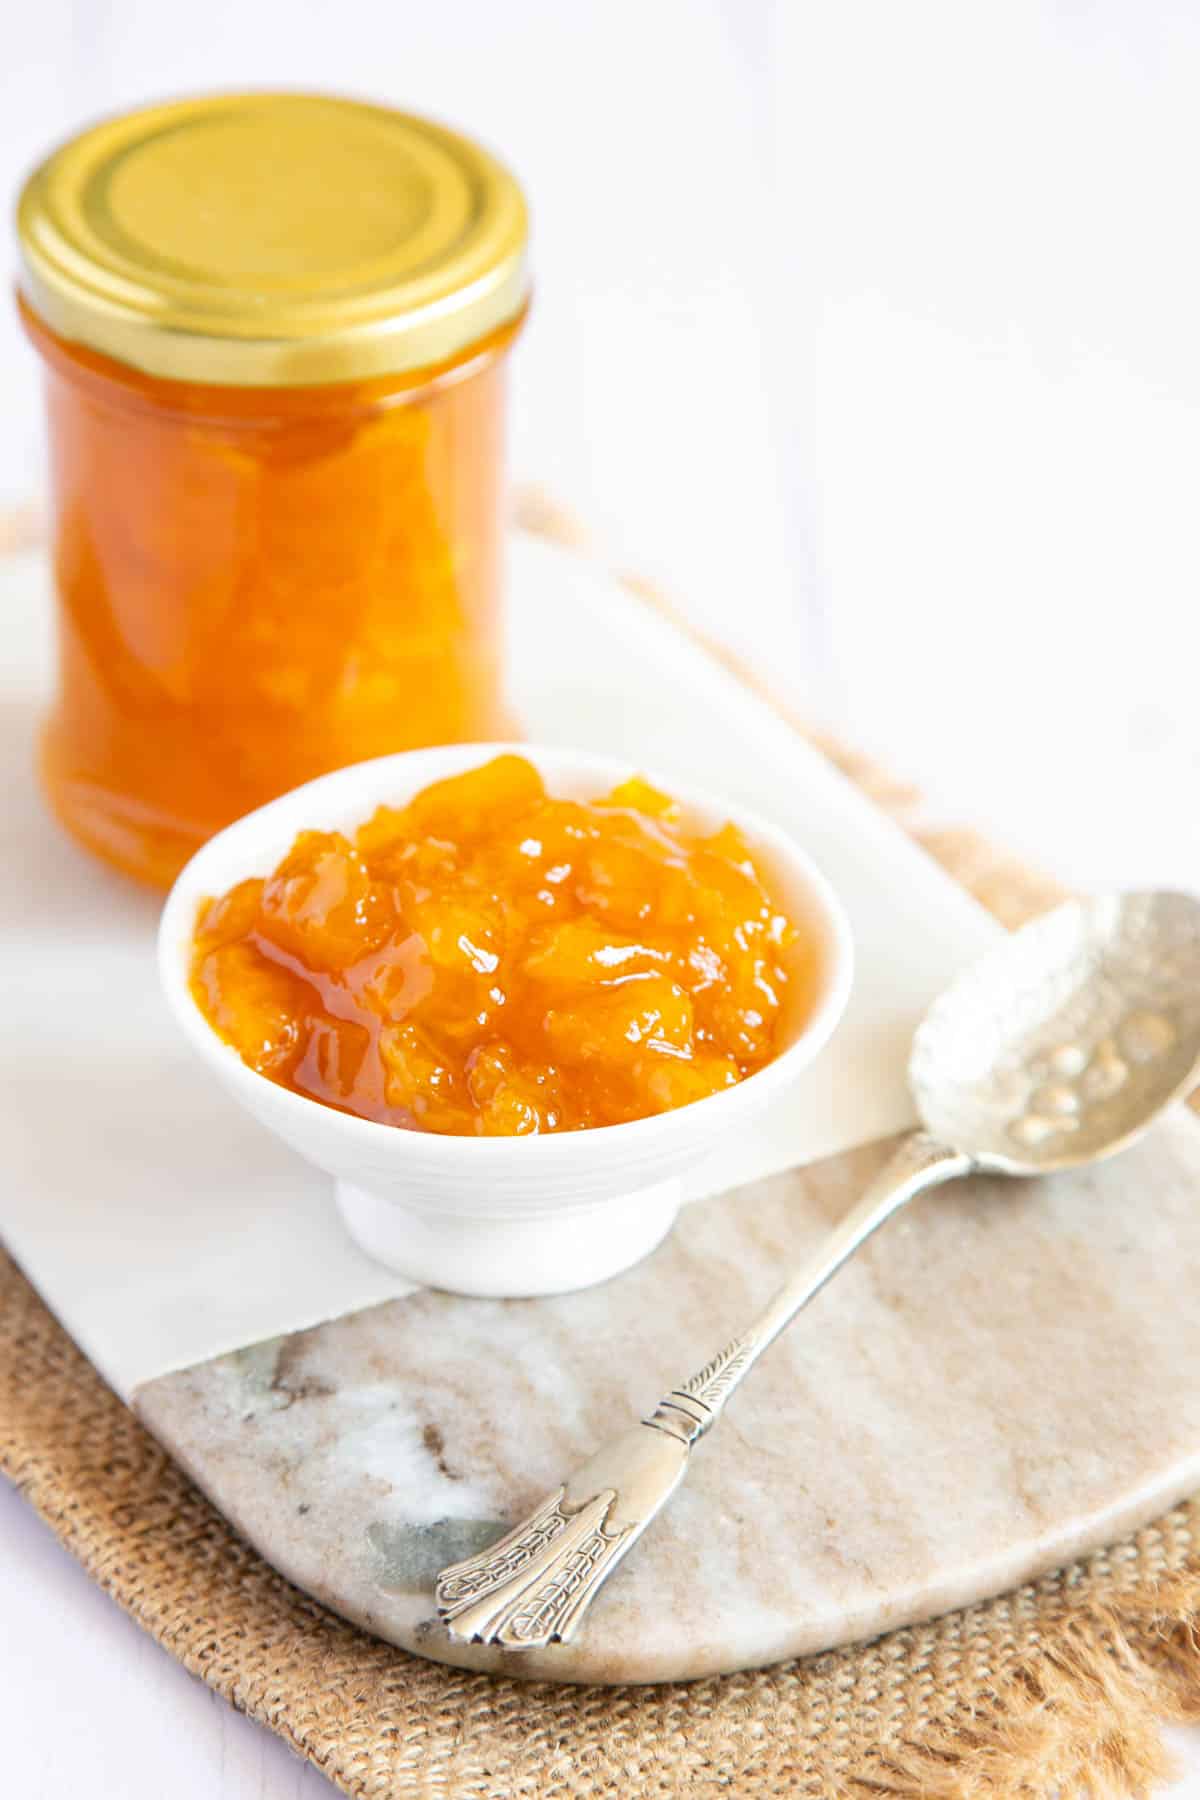 Golden mango jam in a jar and in a dainty serving dish, with a silver spoon alongside.